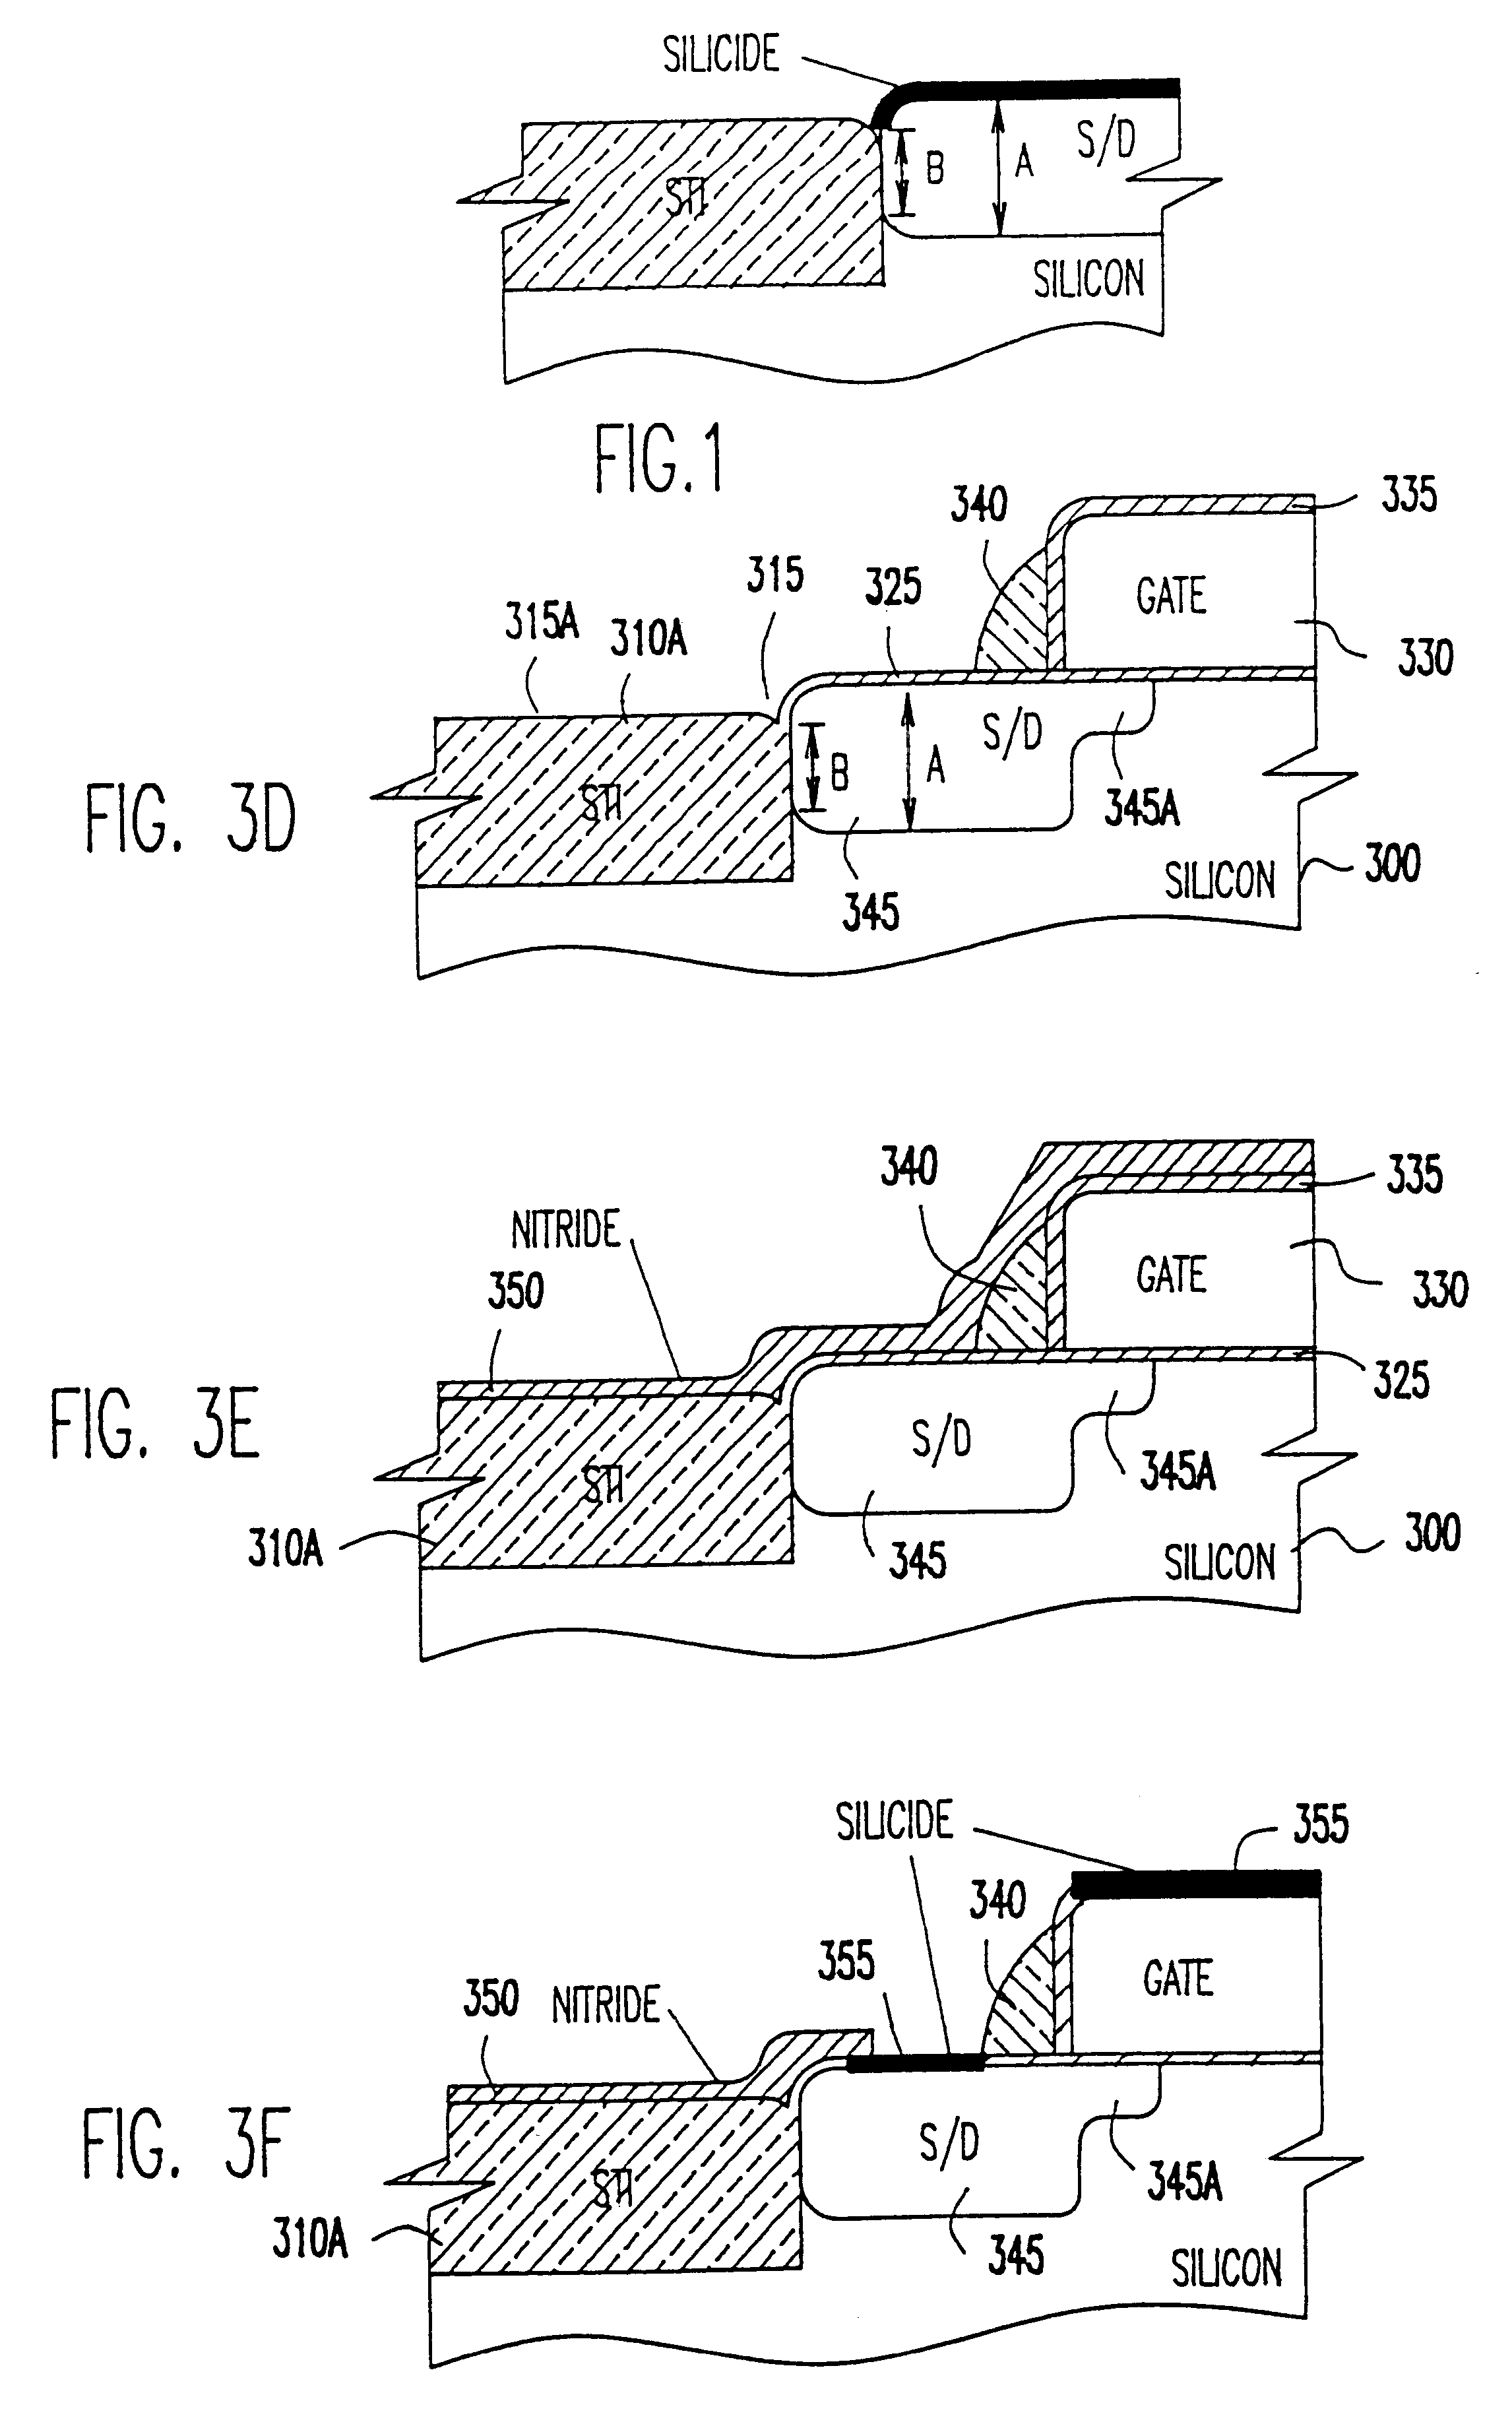 Silicide block bounded device